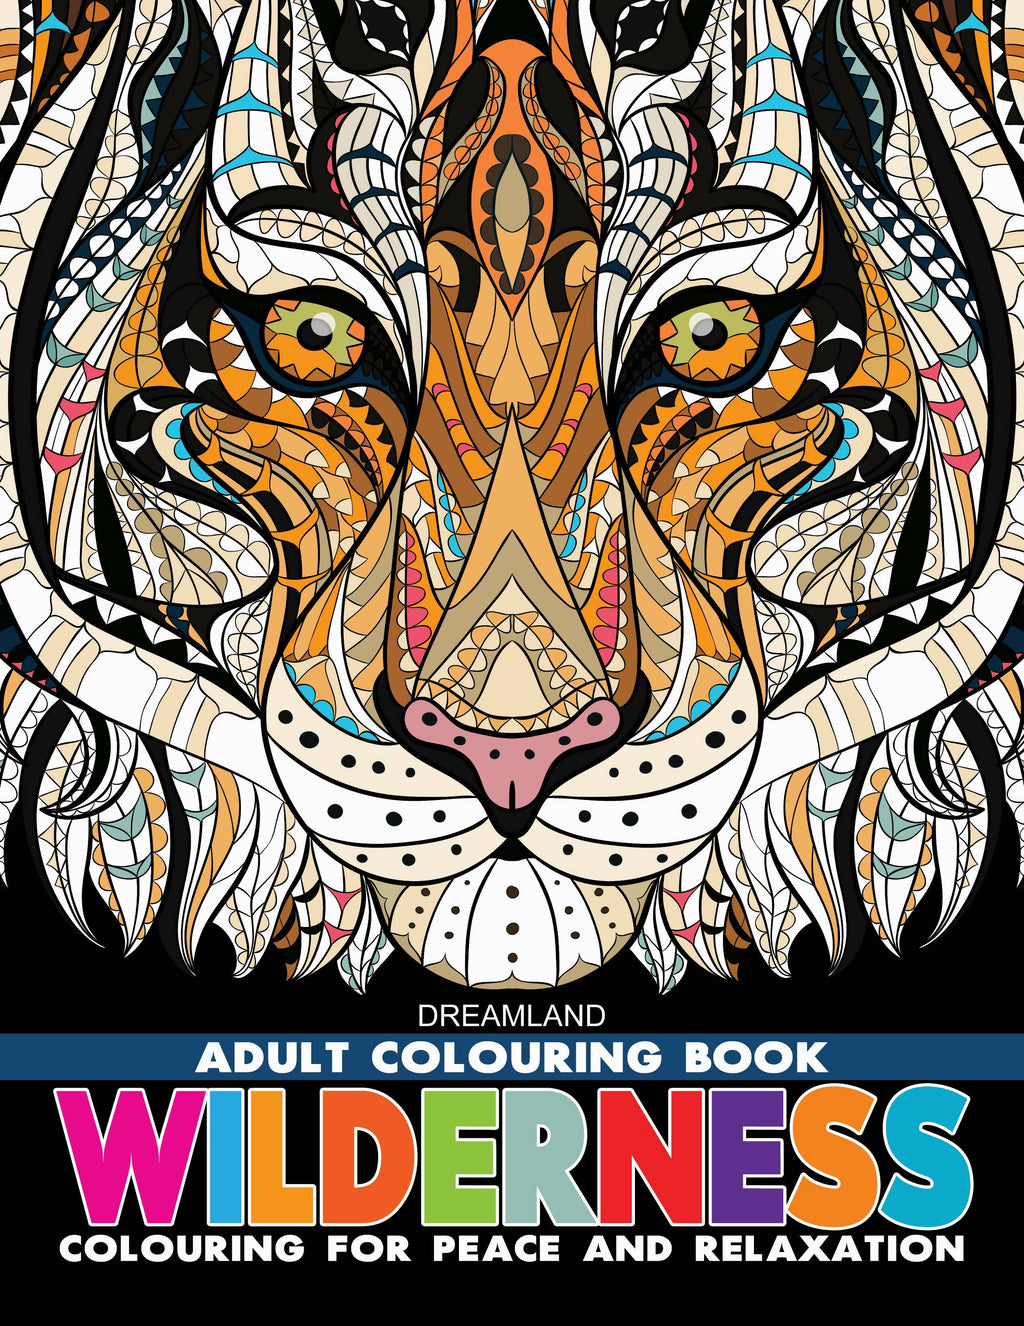 JoGenii, Pack-of-4-Colouring-Books-for-Adult-with-Tear-Out-Sheet-Animals,-Nature,-Mandala-and-Travel